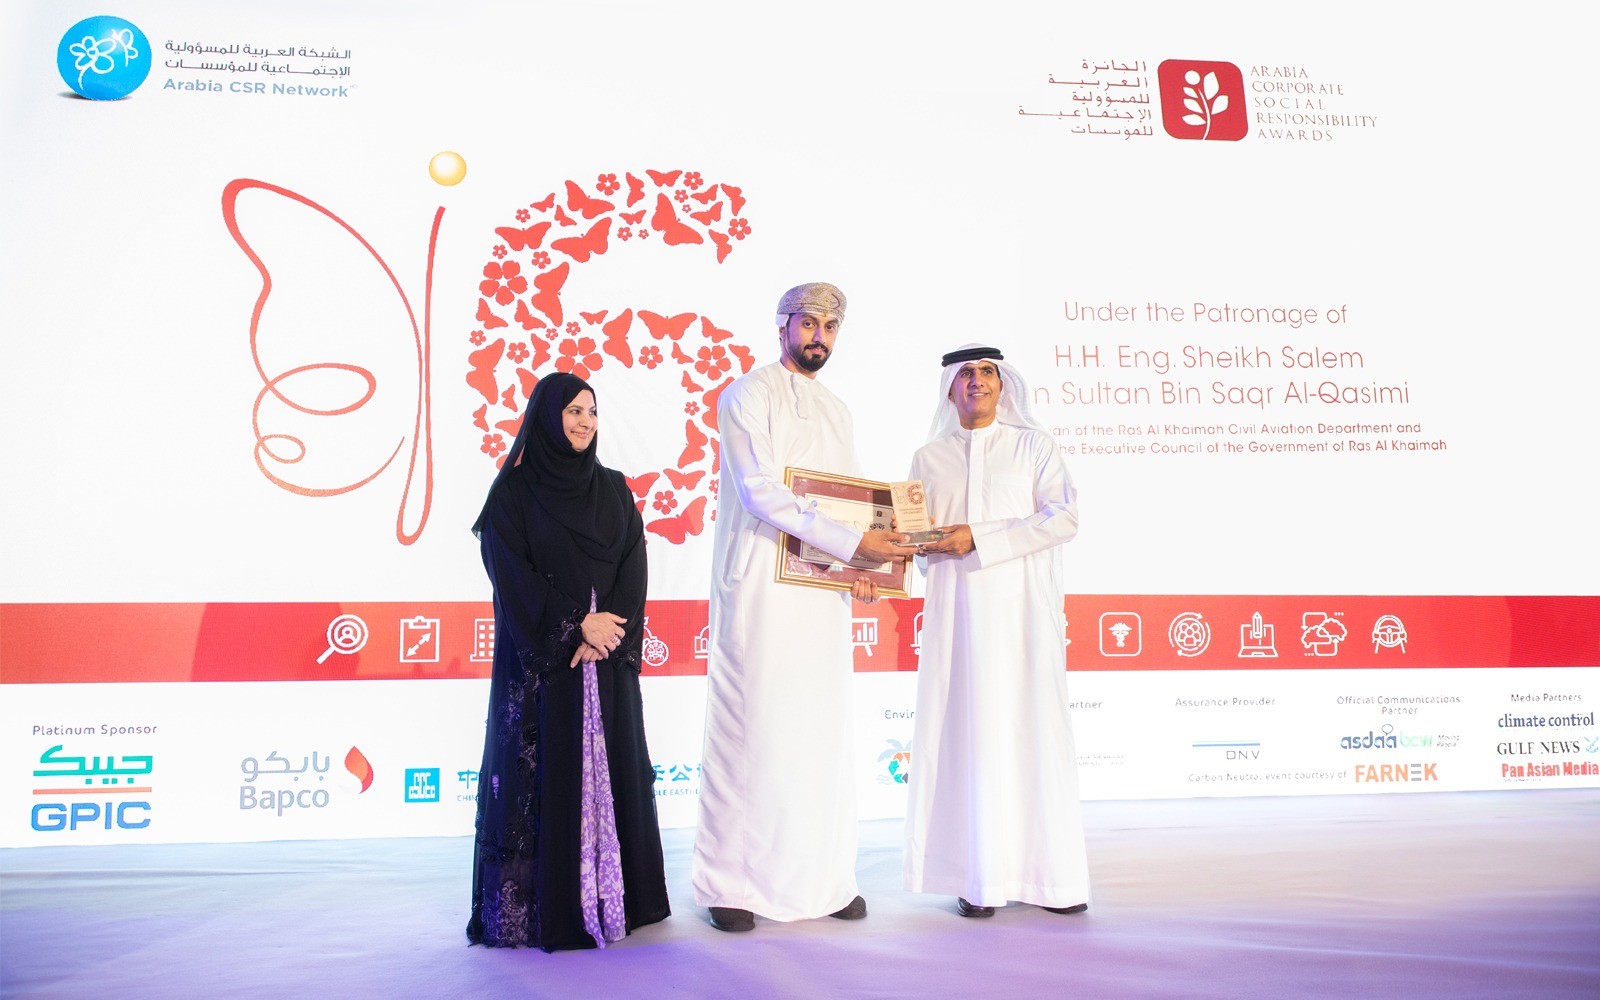 Jusoor Foundation Wins Second Place in the Arabia Corporate Social Responsibility Award